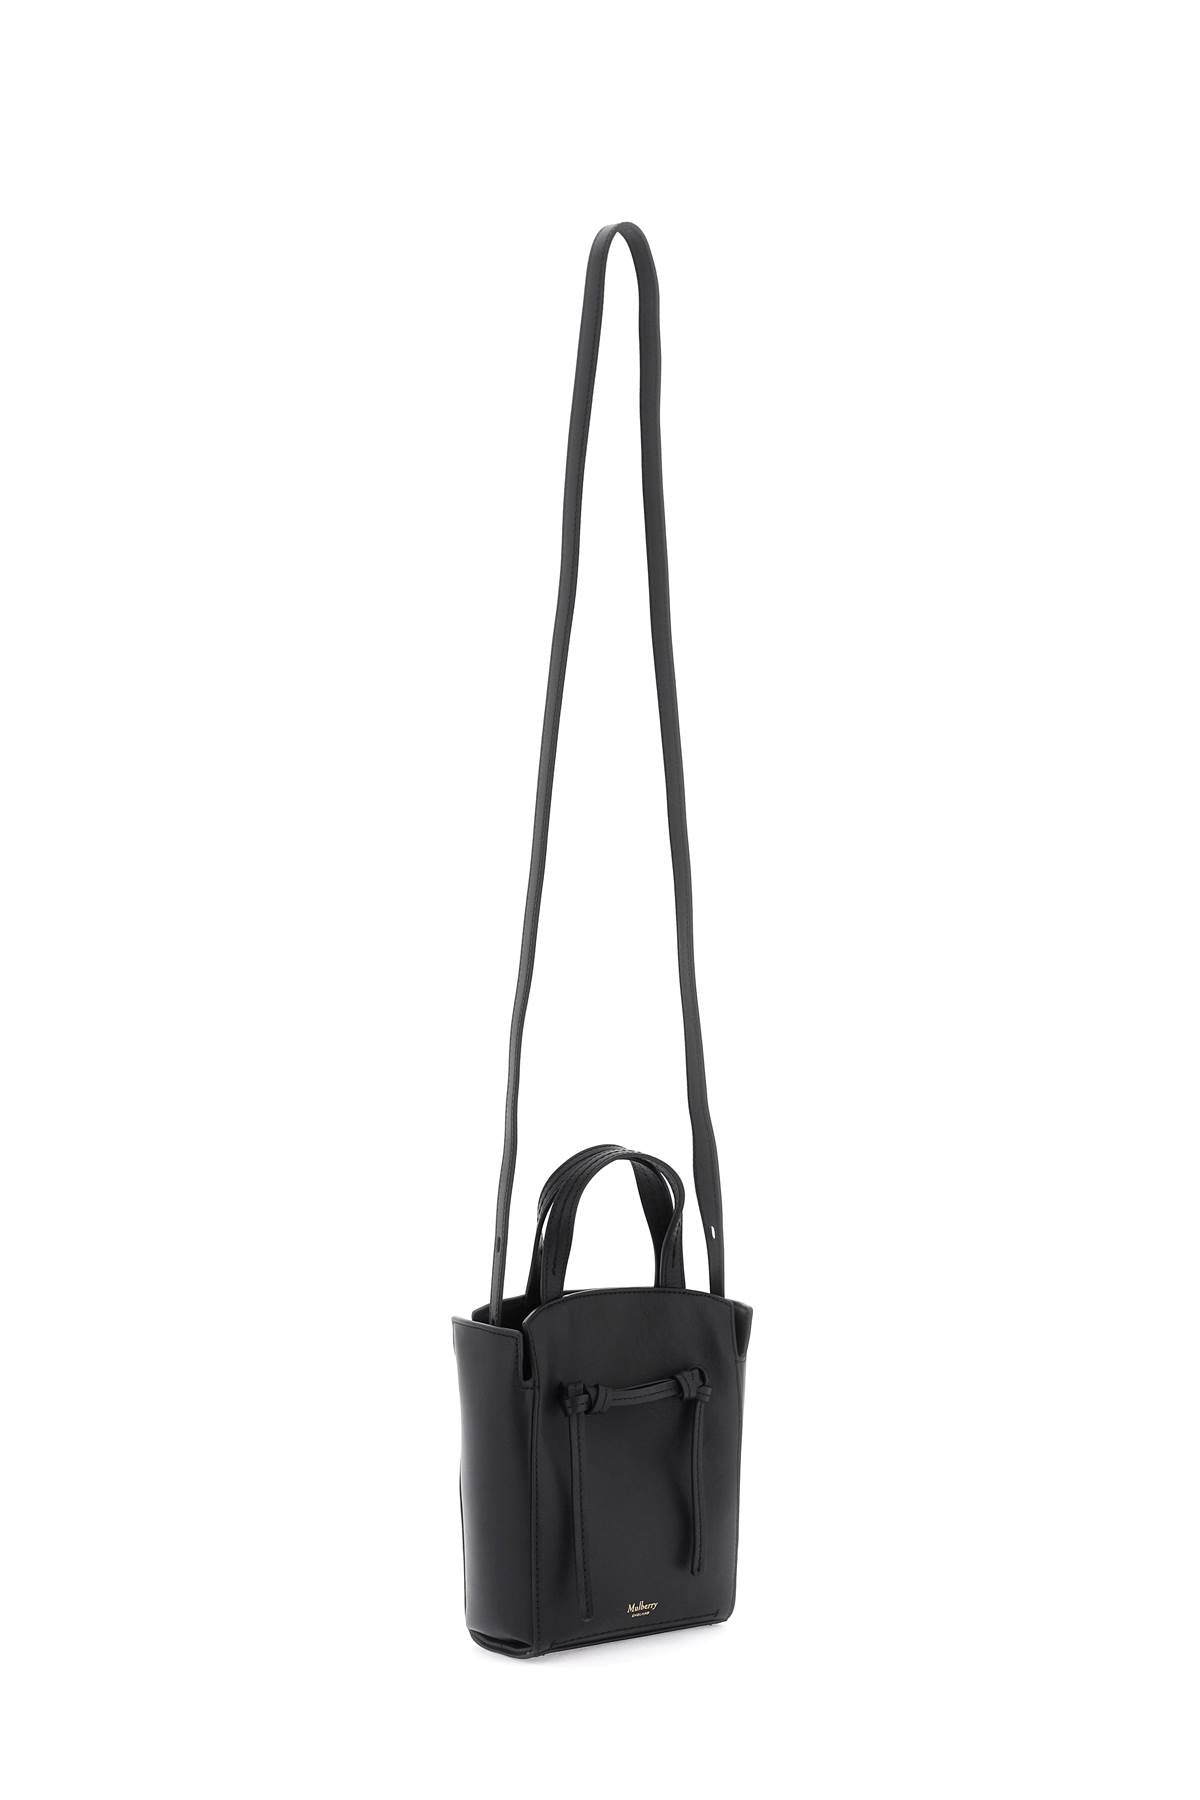 Mulberry mini clovelly tote bag-2